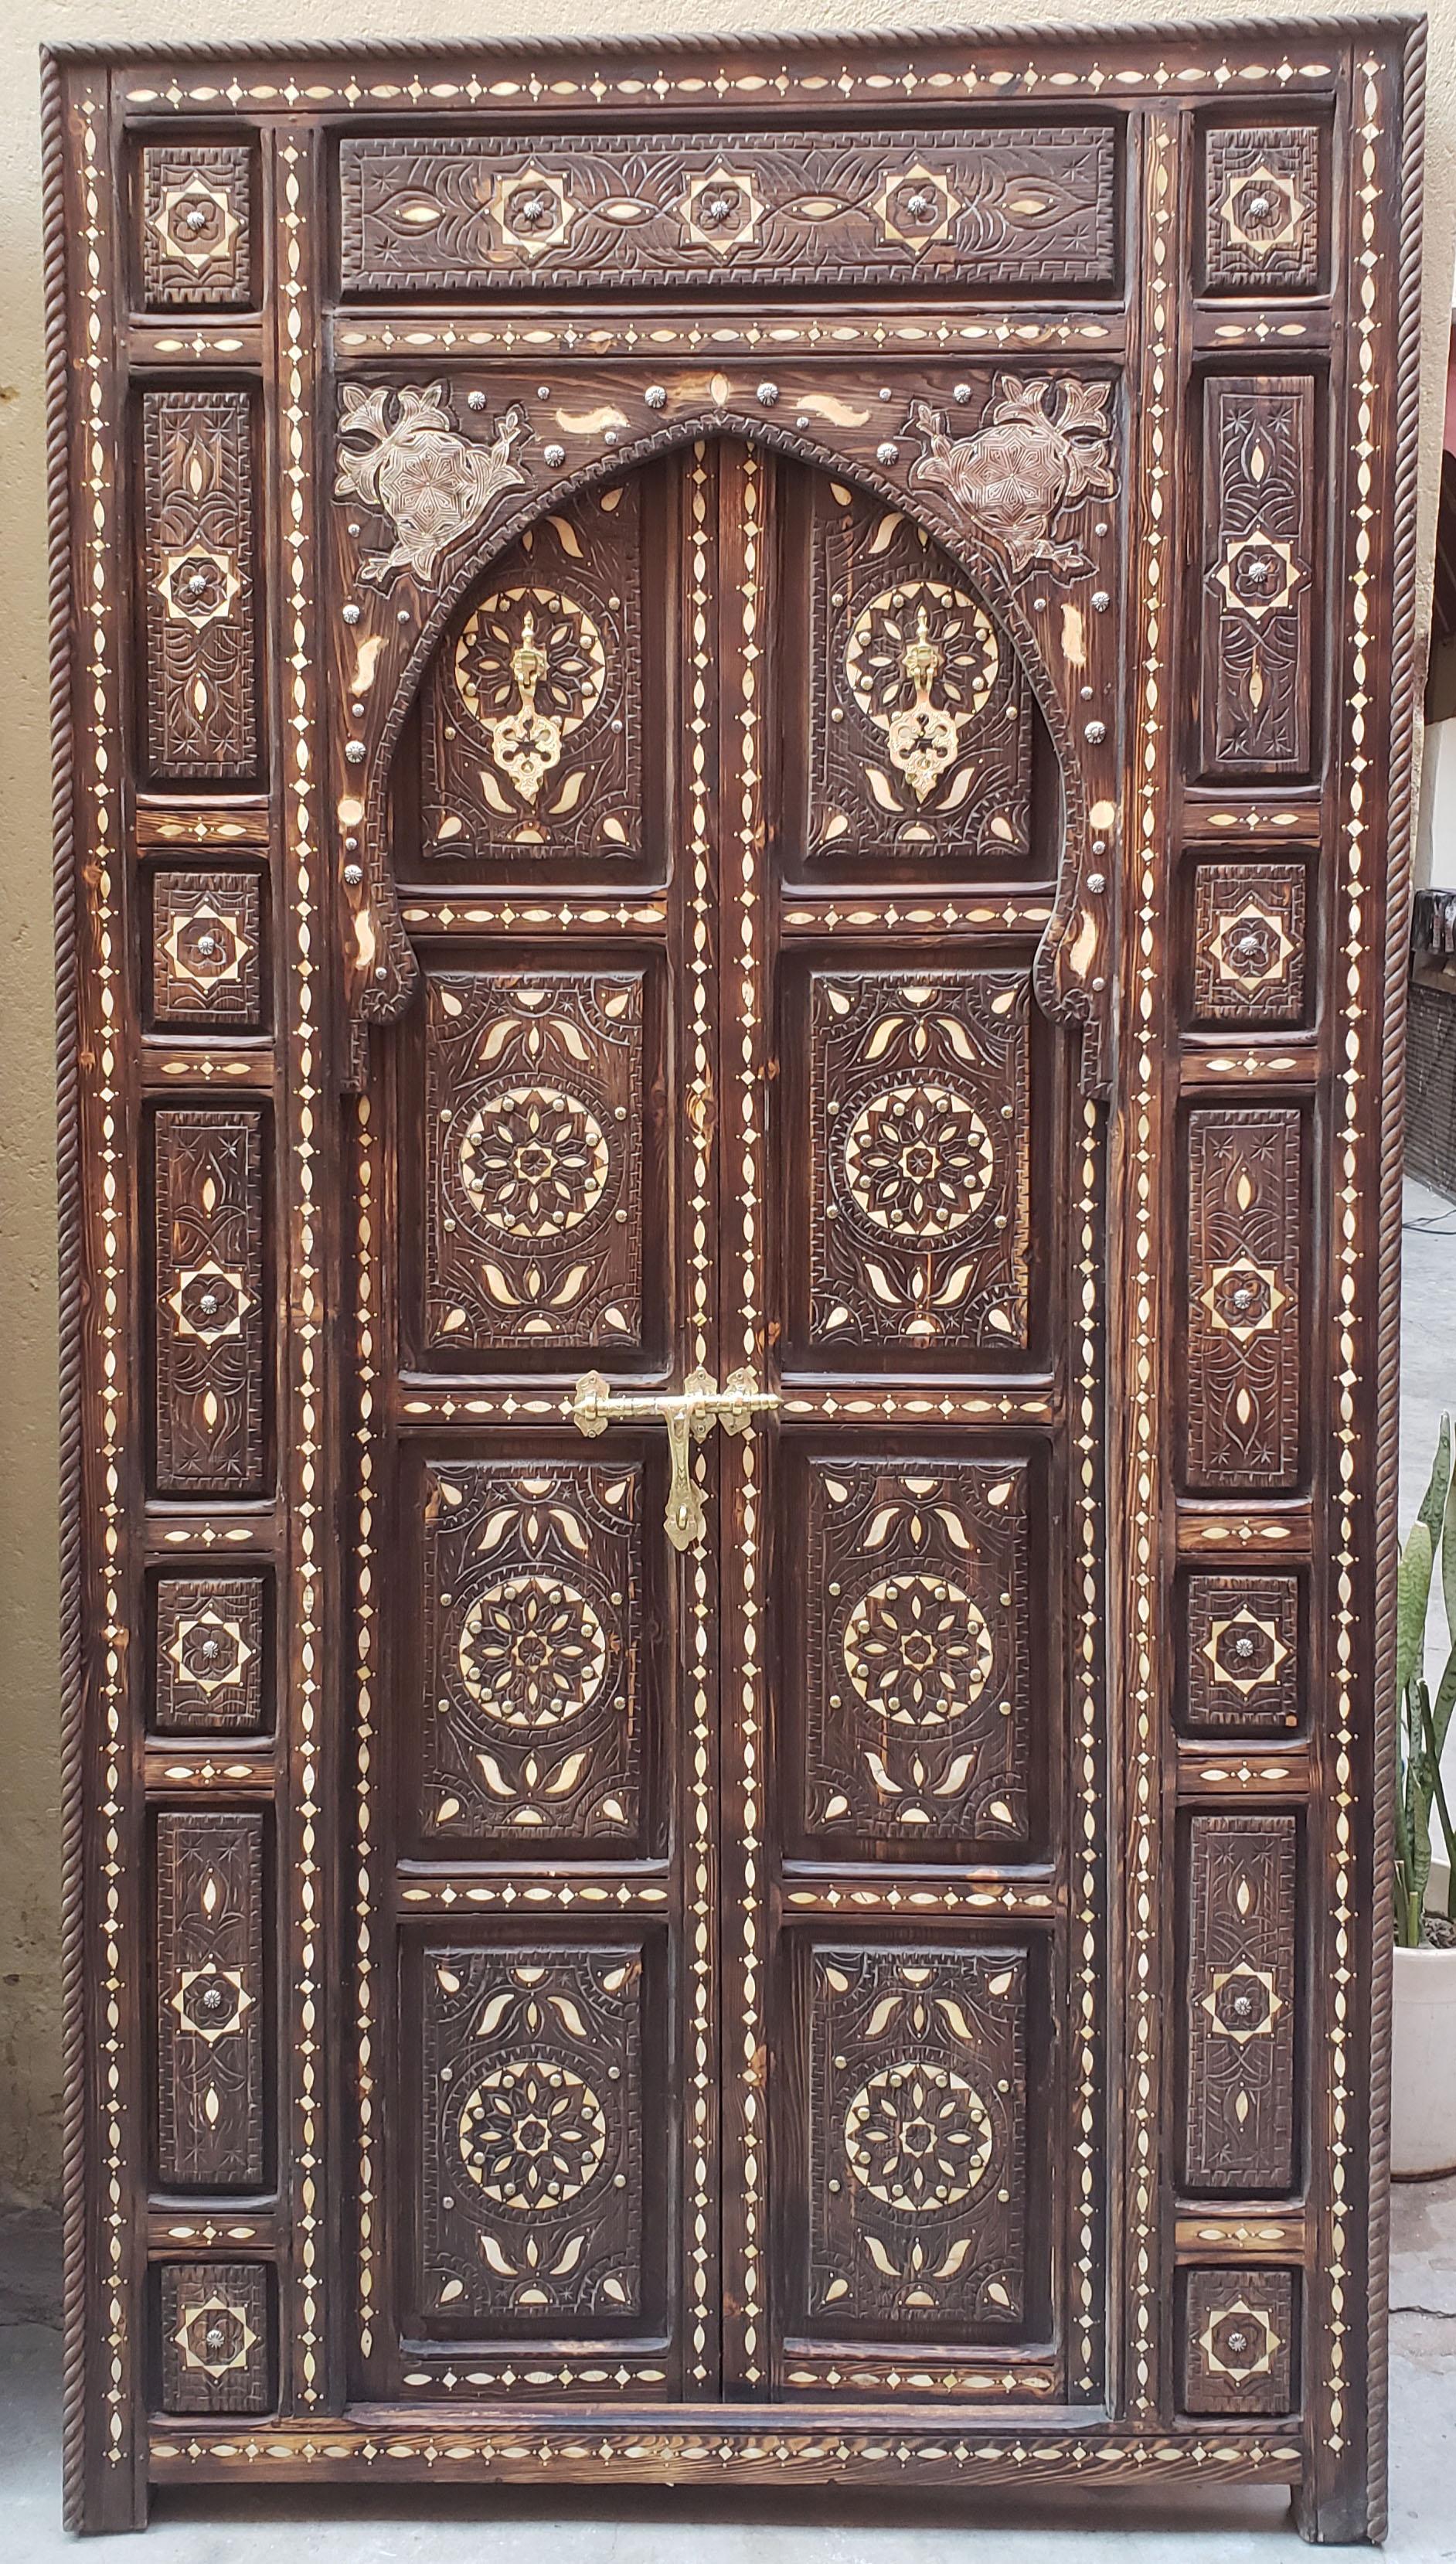 Contemporary Amazing Chefchaouen Wooden Door All Inlaid, LM24 / 1 For Sale